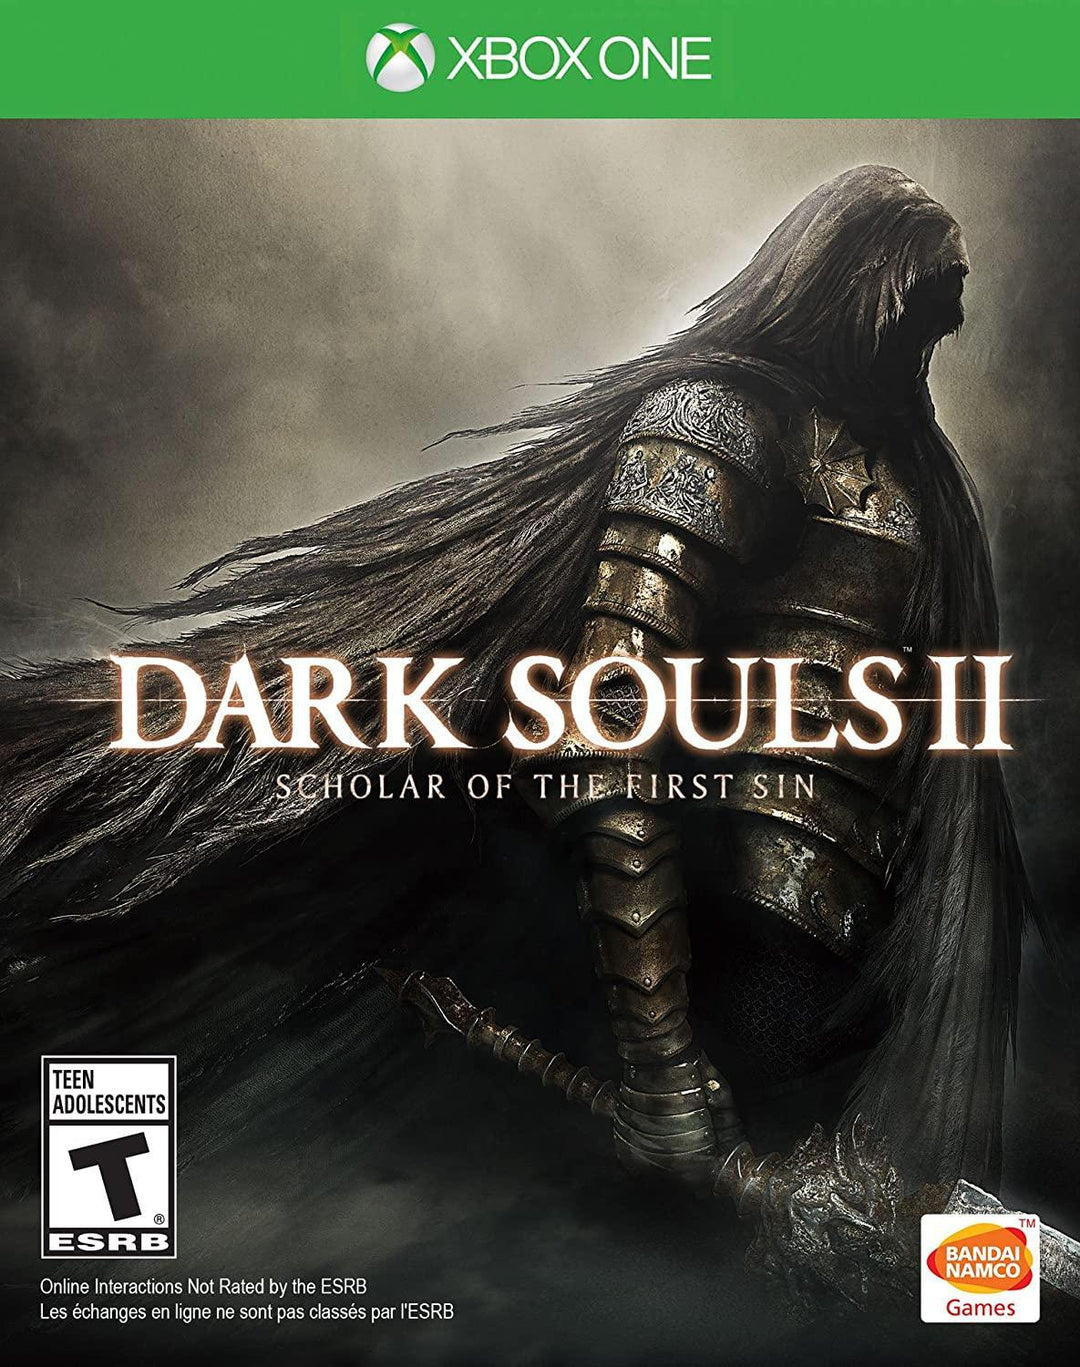 Dark Souls 2 II: Scholar of the First Sin - Xbox One - GD Games 